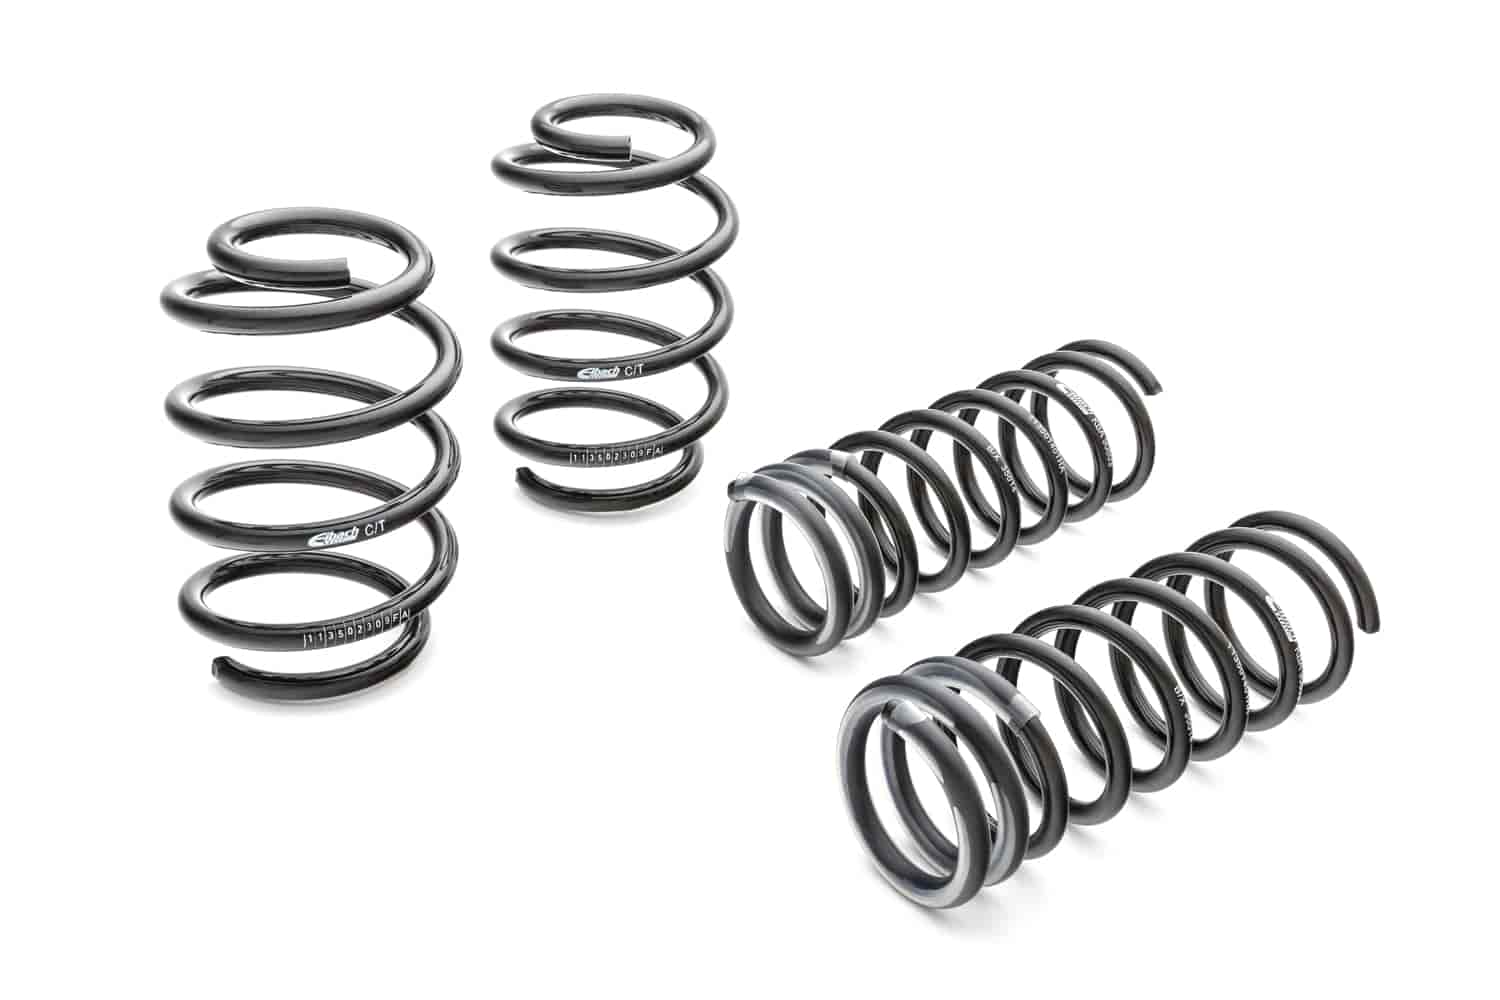 38131.520 Pro-SUV Lowering Springs 2007-13 Avalanche - 3.0" Rear Drop